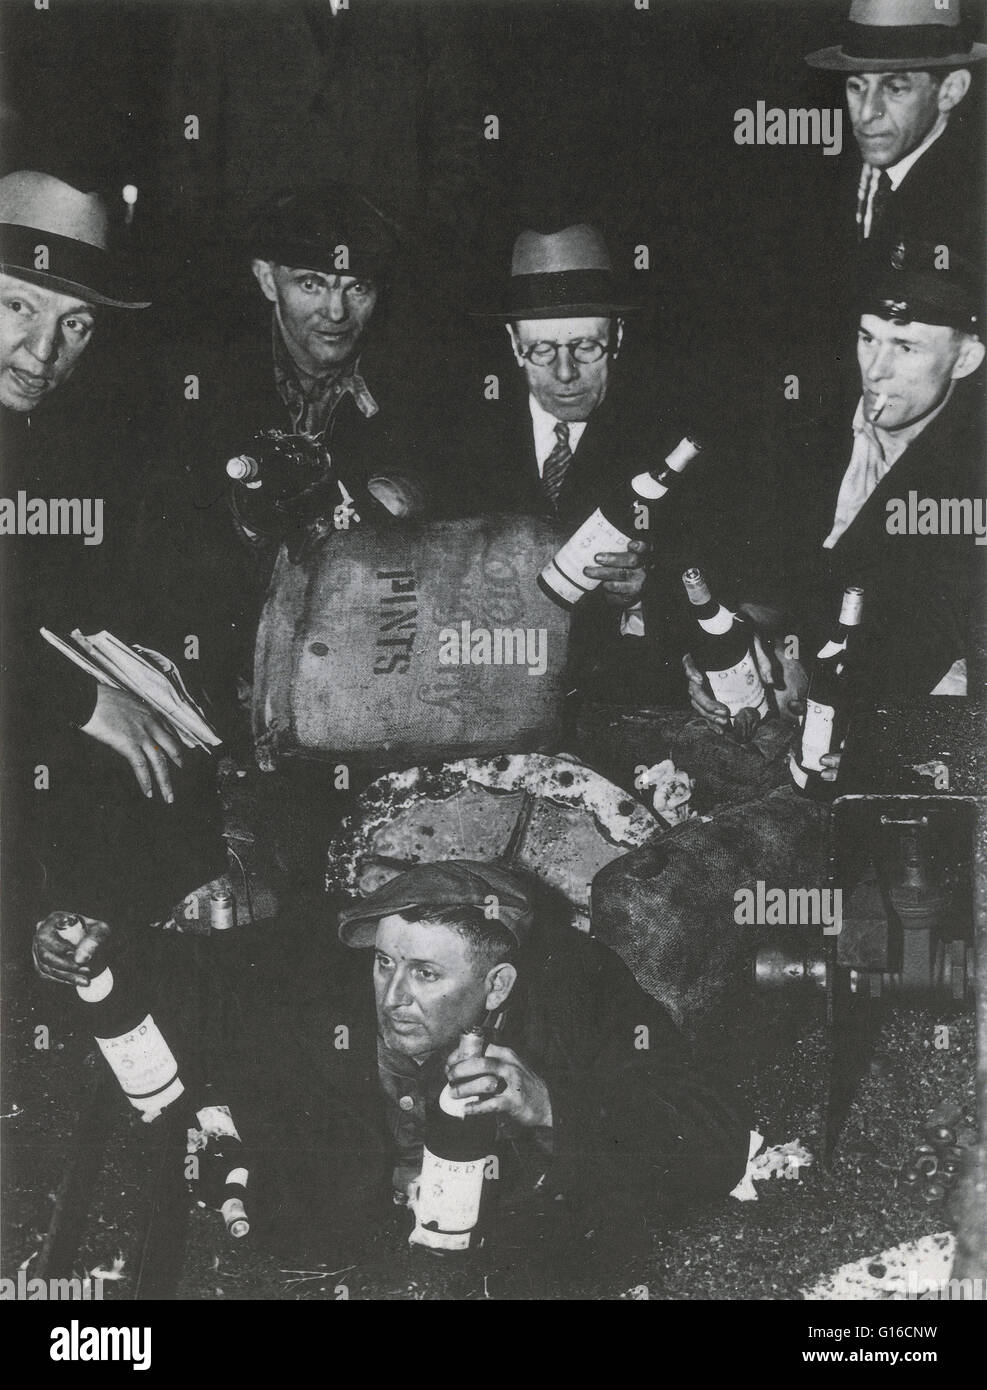 Federal agents uncovering bottles of alcohol during a raid on a speakeasy in New York City, 1932. Prohibition in the United States was a nationwide Constitutional ban on the sale, production, importation, and transportation of alcoholic beverages that rem Stock Photo